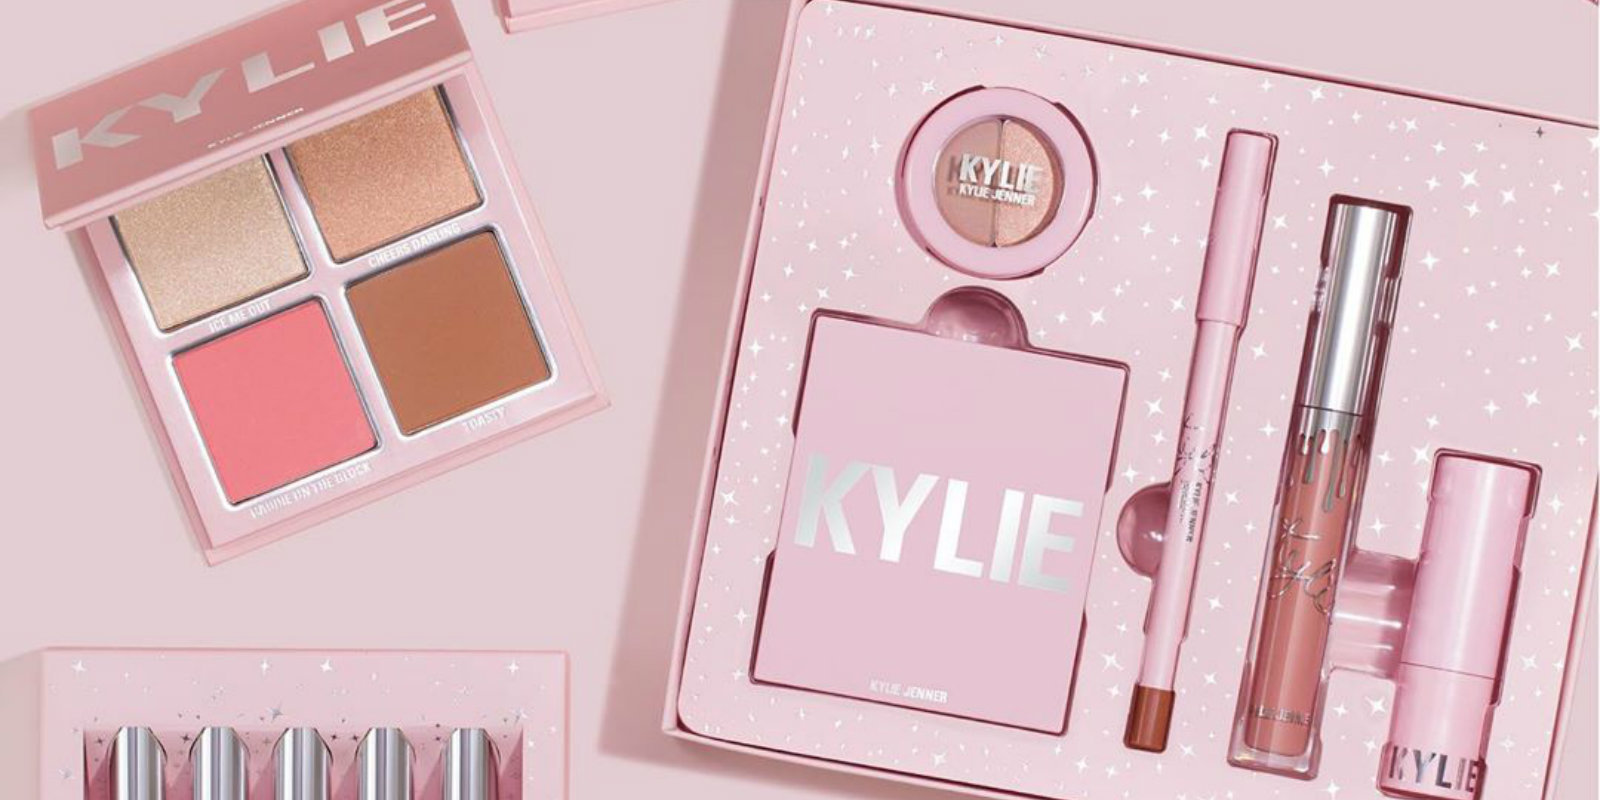 Kylie Cosmetics Dropped an Exclusive Holiday Collection